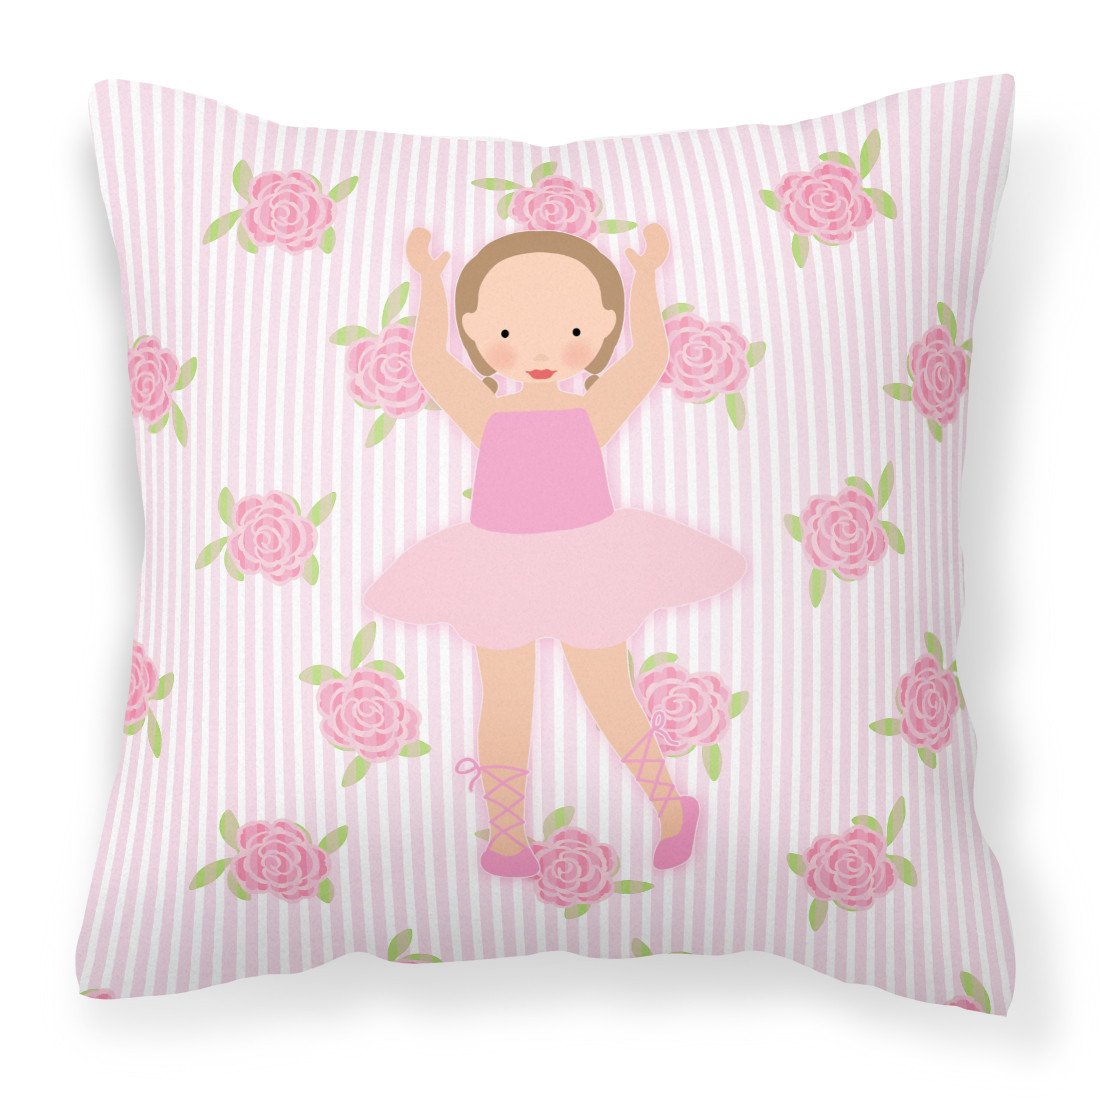 Ballerina Brown Hair Ponytails Fabric Decorative Pillow BB5189PW1818 by Caroline's Treasures